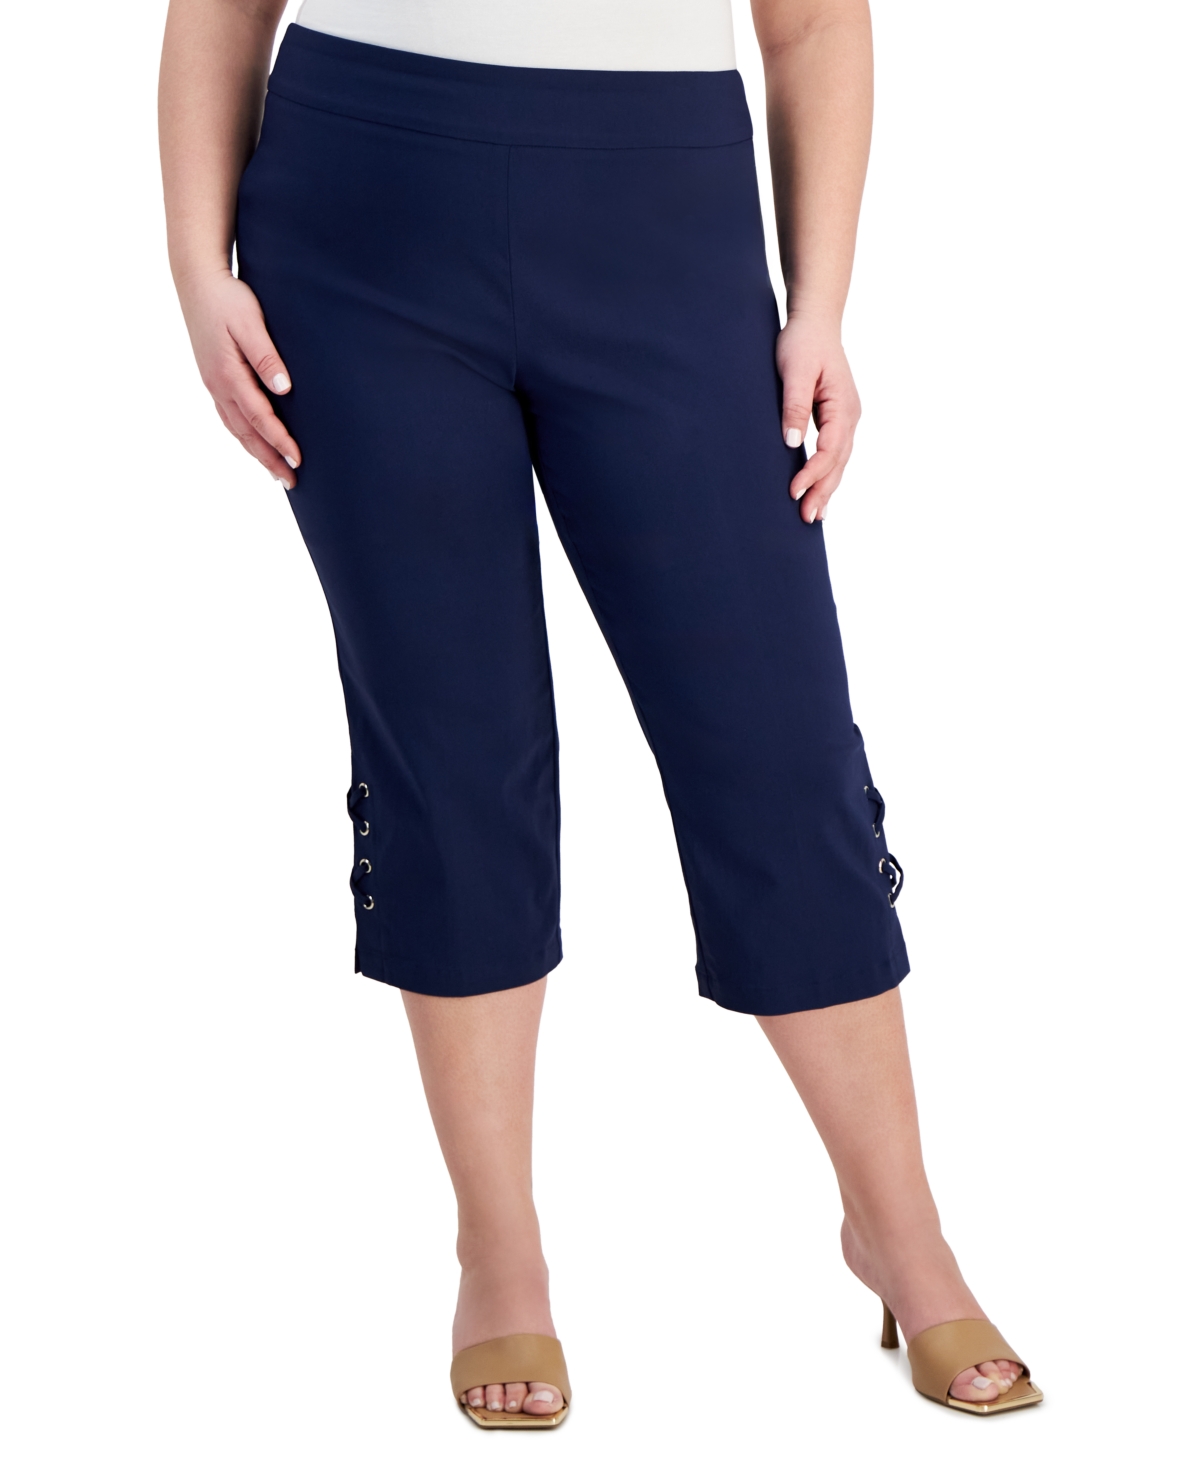 Plus Size Side Lace-Up Capri Pants, Created for Macy's - Intrepid Blue